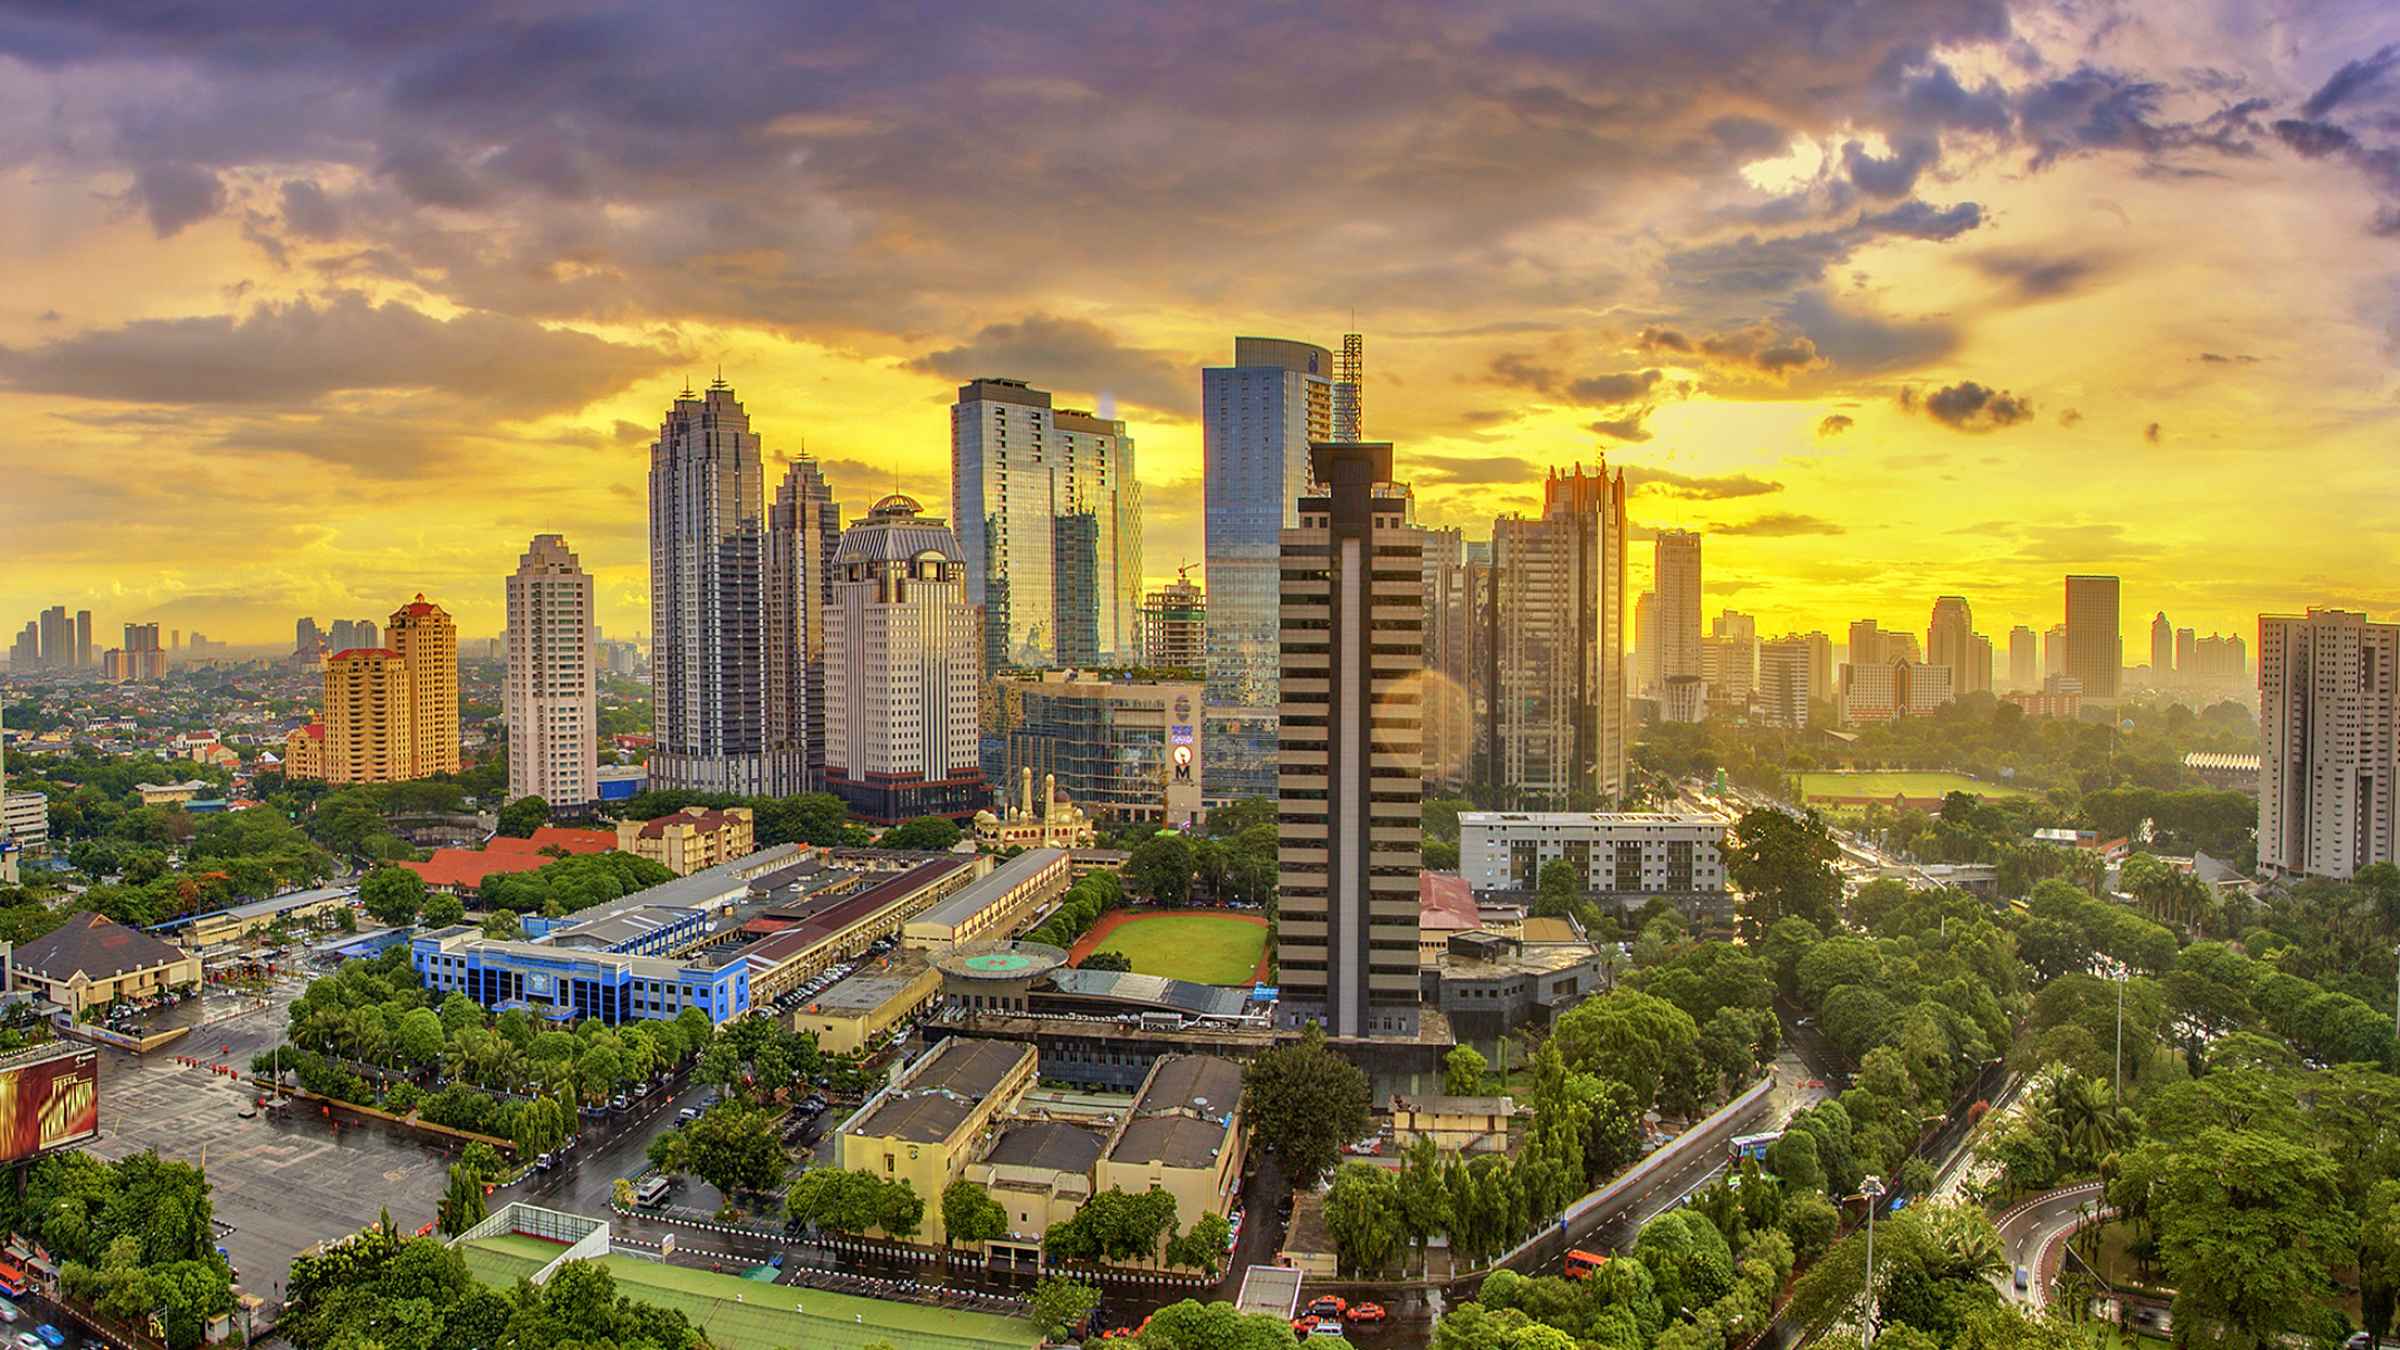 Jakarta 2021: Top 10 Tours & Activities (with Photos) - Things to Do in